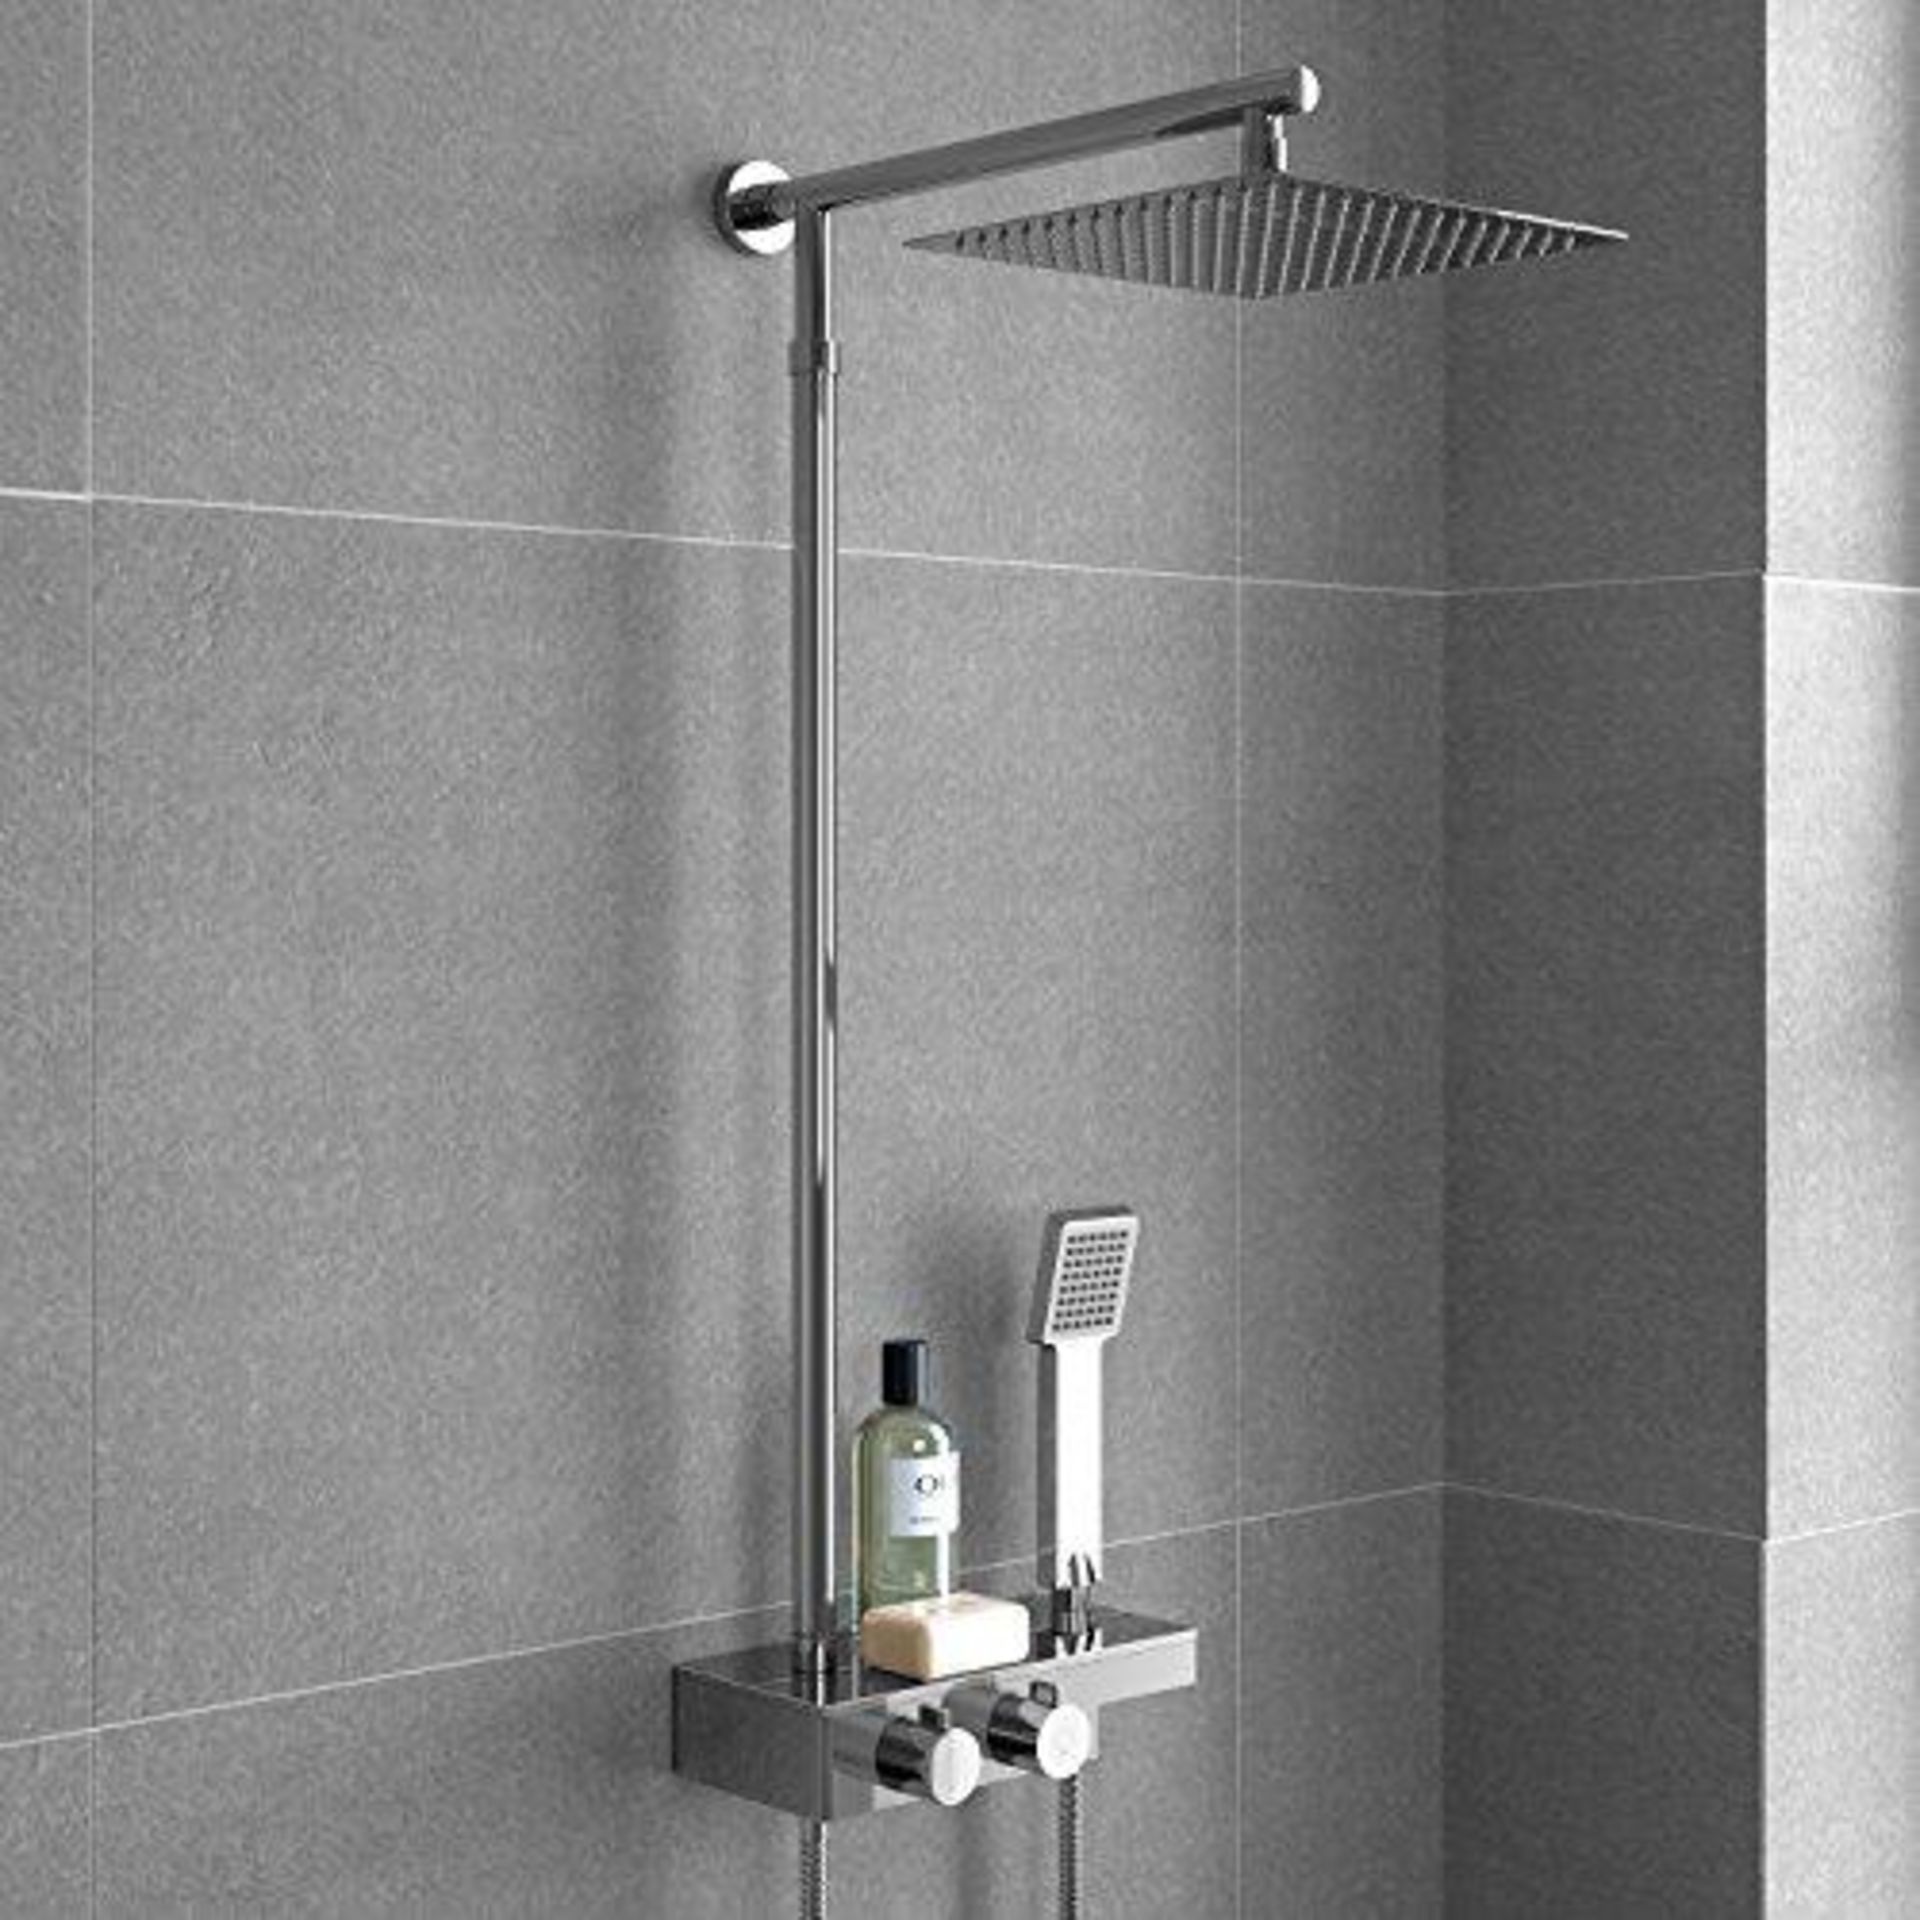 New & Boxed Square Thermostatic Bar Mixer Shower Set Valve With Shelf 10"" Head + Handset. Rrp ... - Image 2 of 2